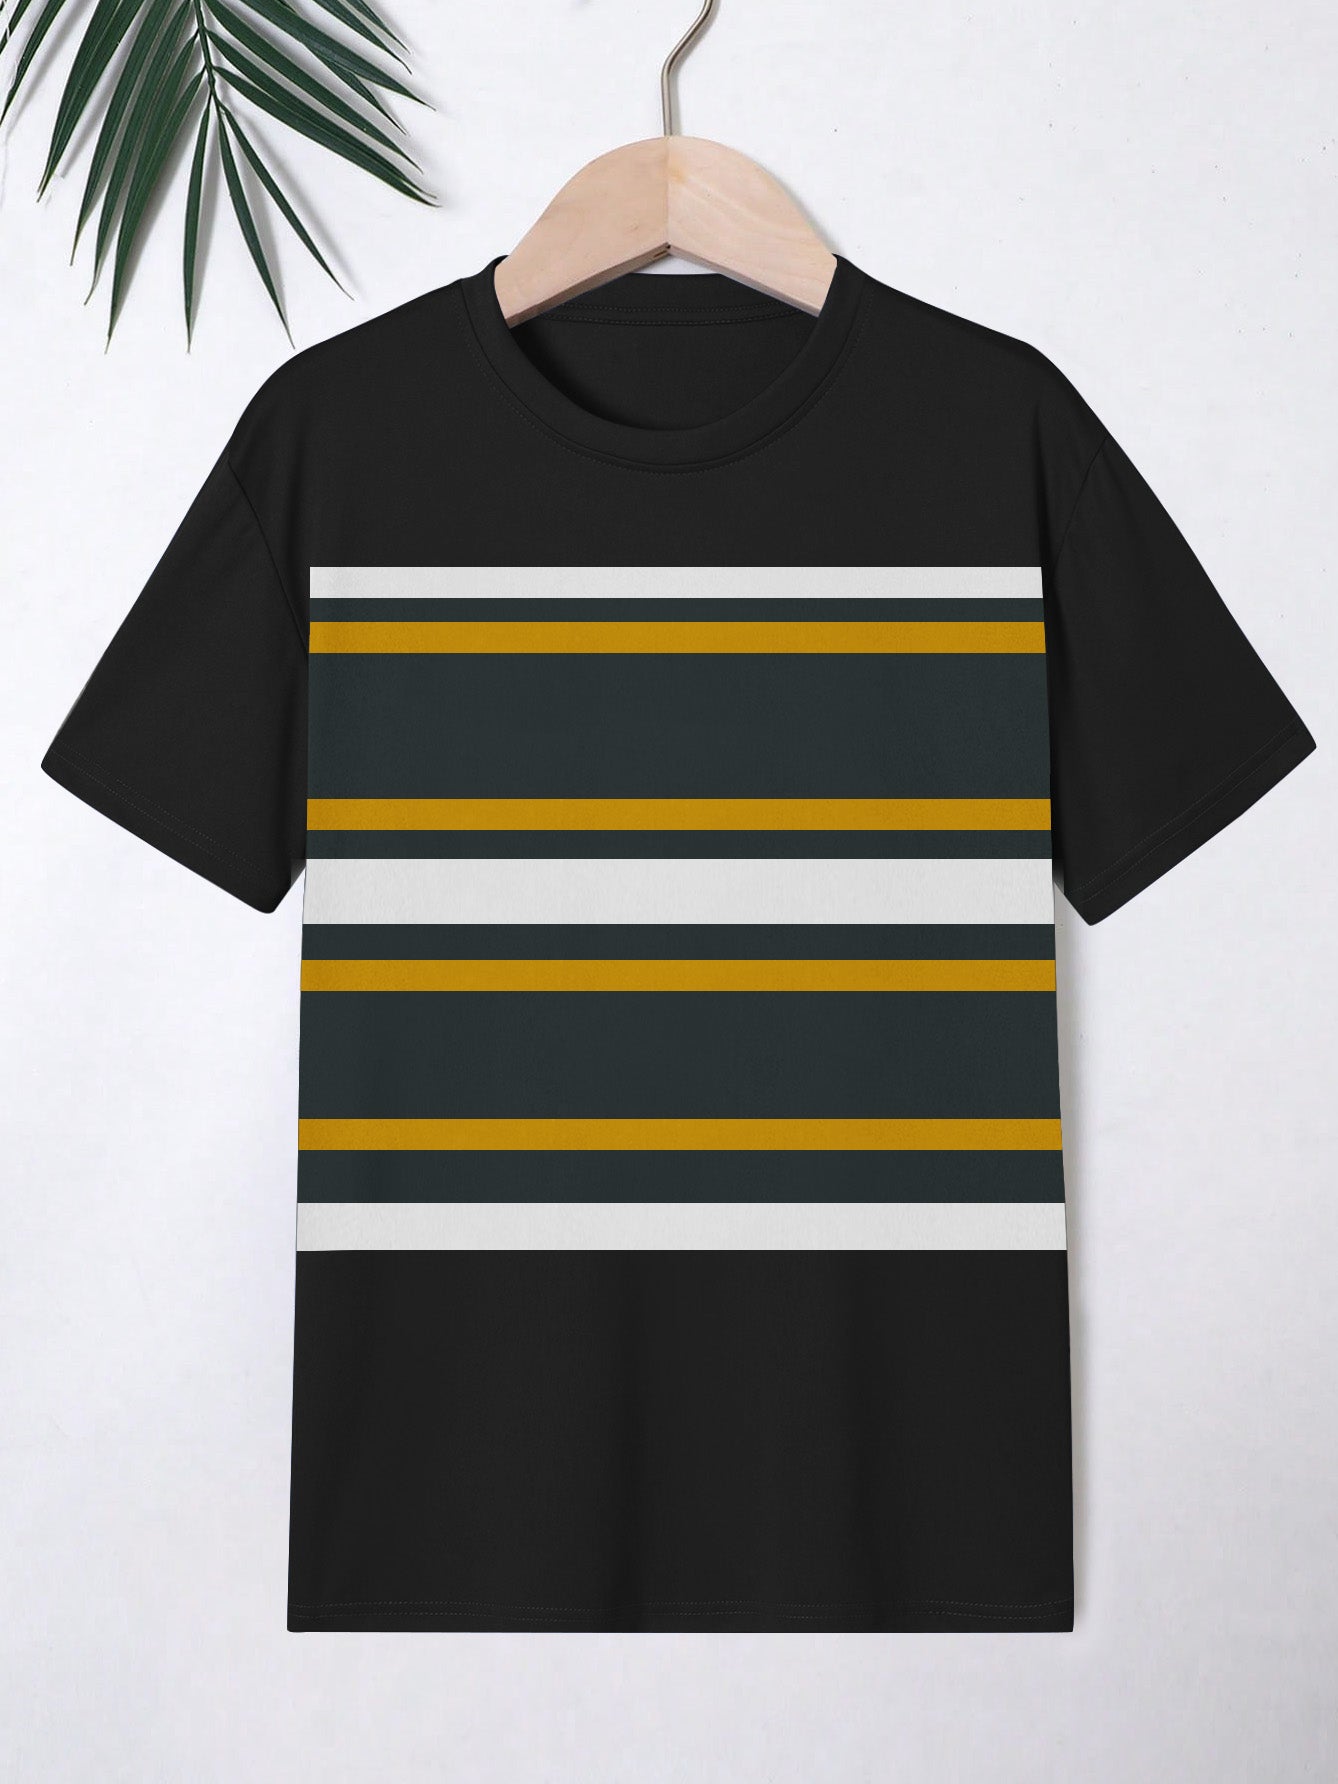 NXT Crew Neck Single Jersey Tee Shirt For Kids-Black with Stripes-SP2239